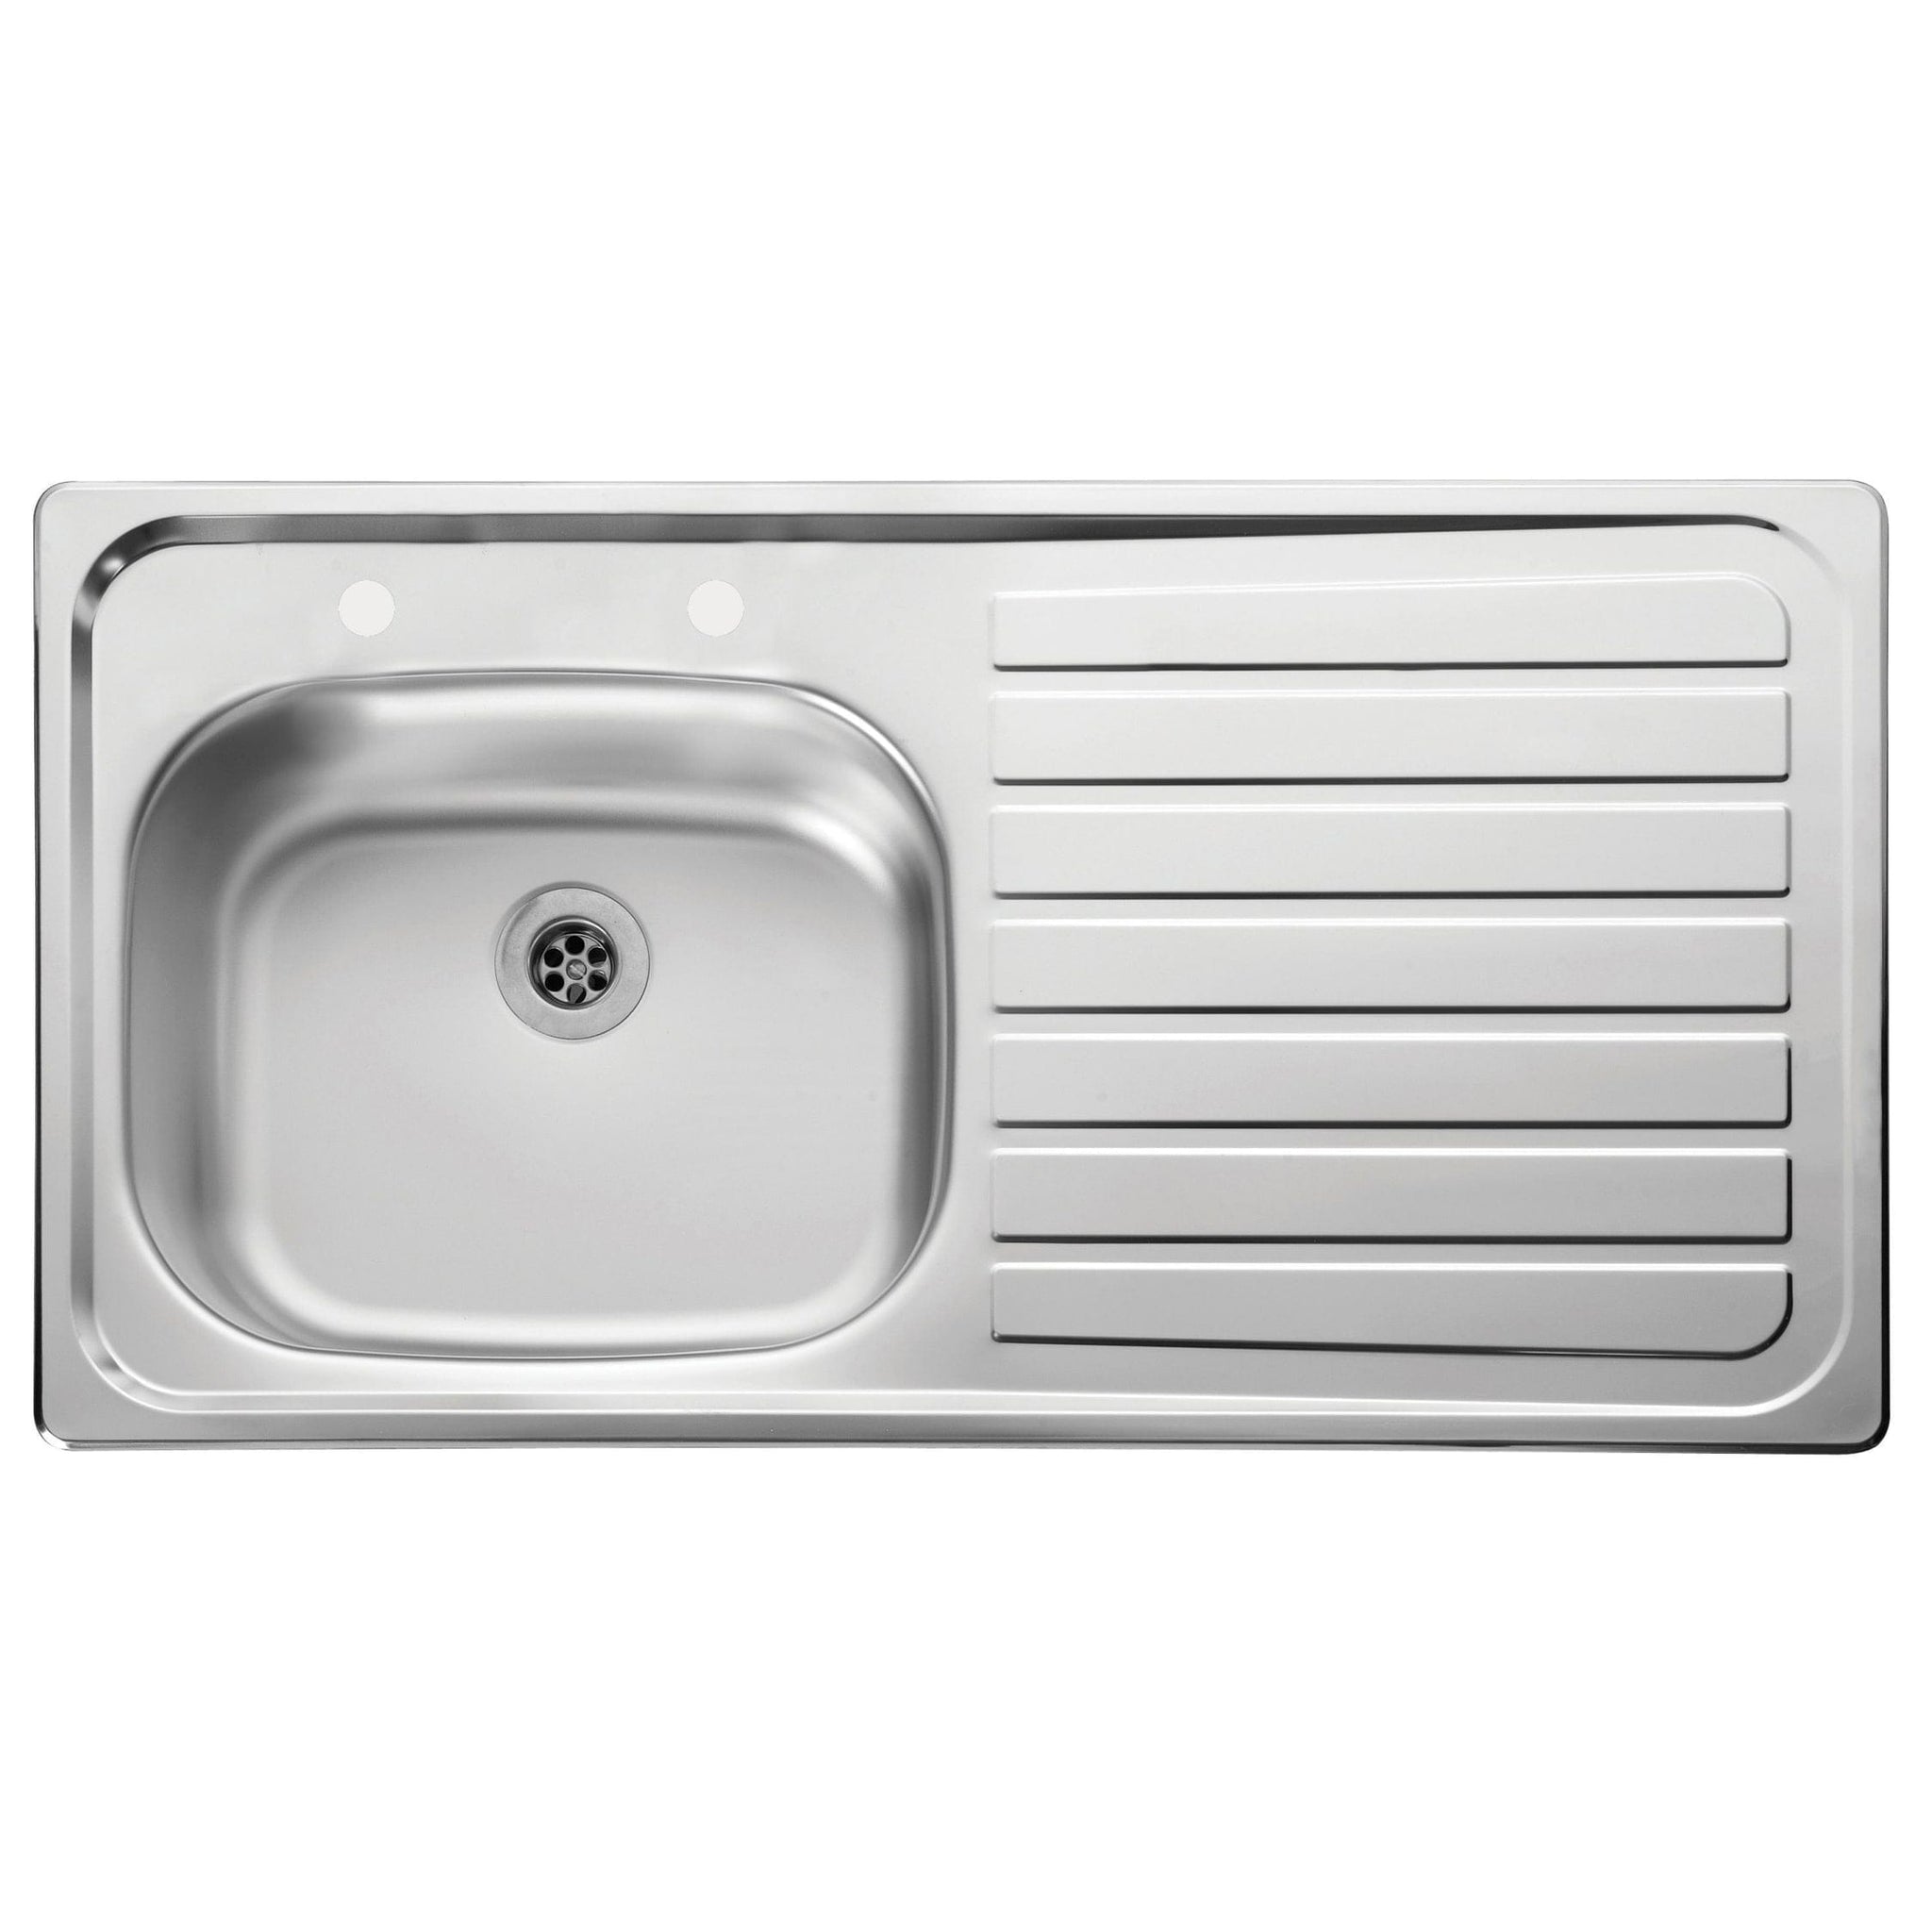 Durable Stainless Steel Kitchen Sink, Single Basin with Right Side Drain Board, Perfect for Home or Commercial Kitchen - AUGH018